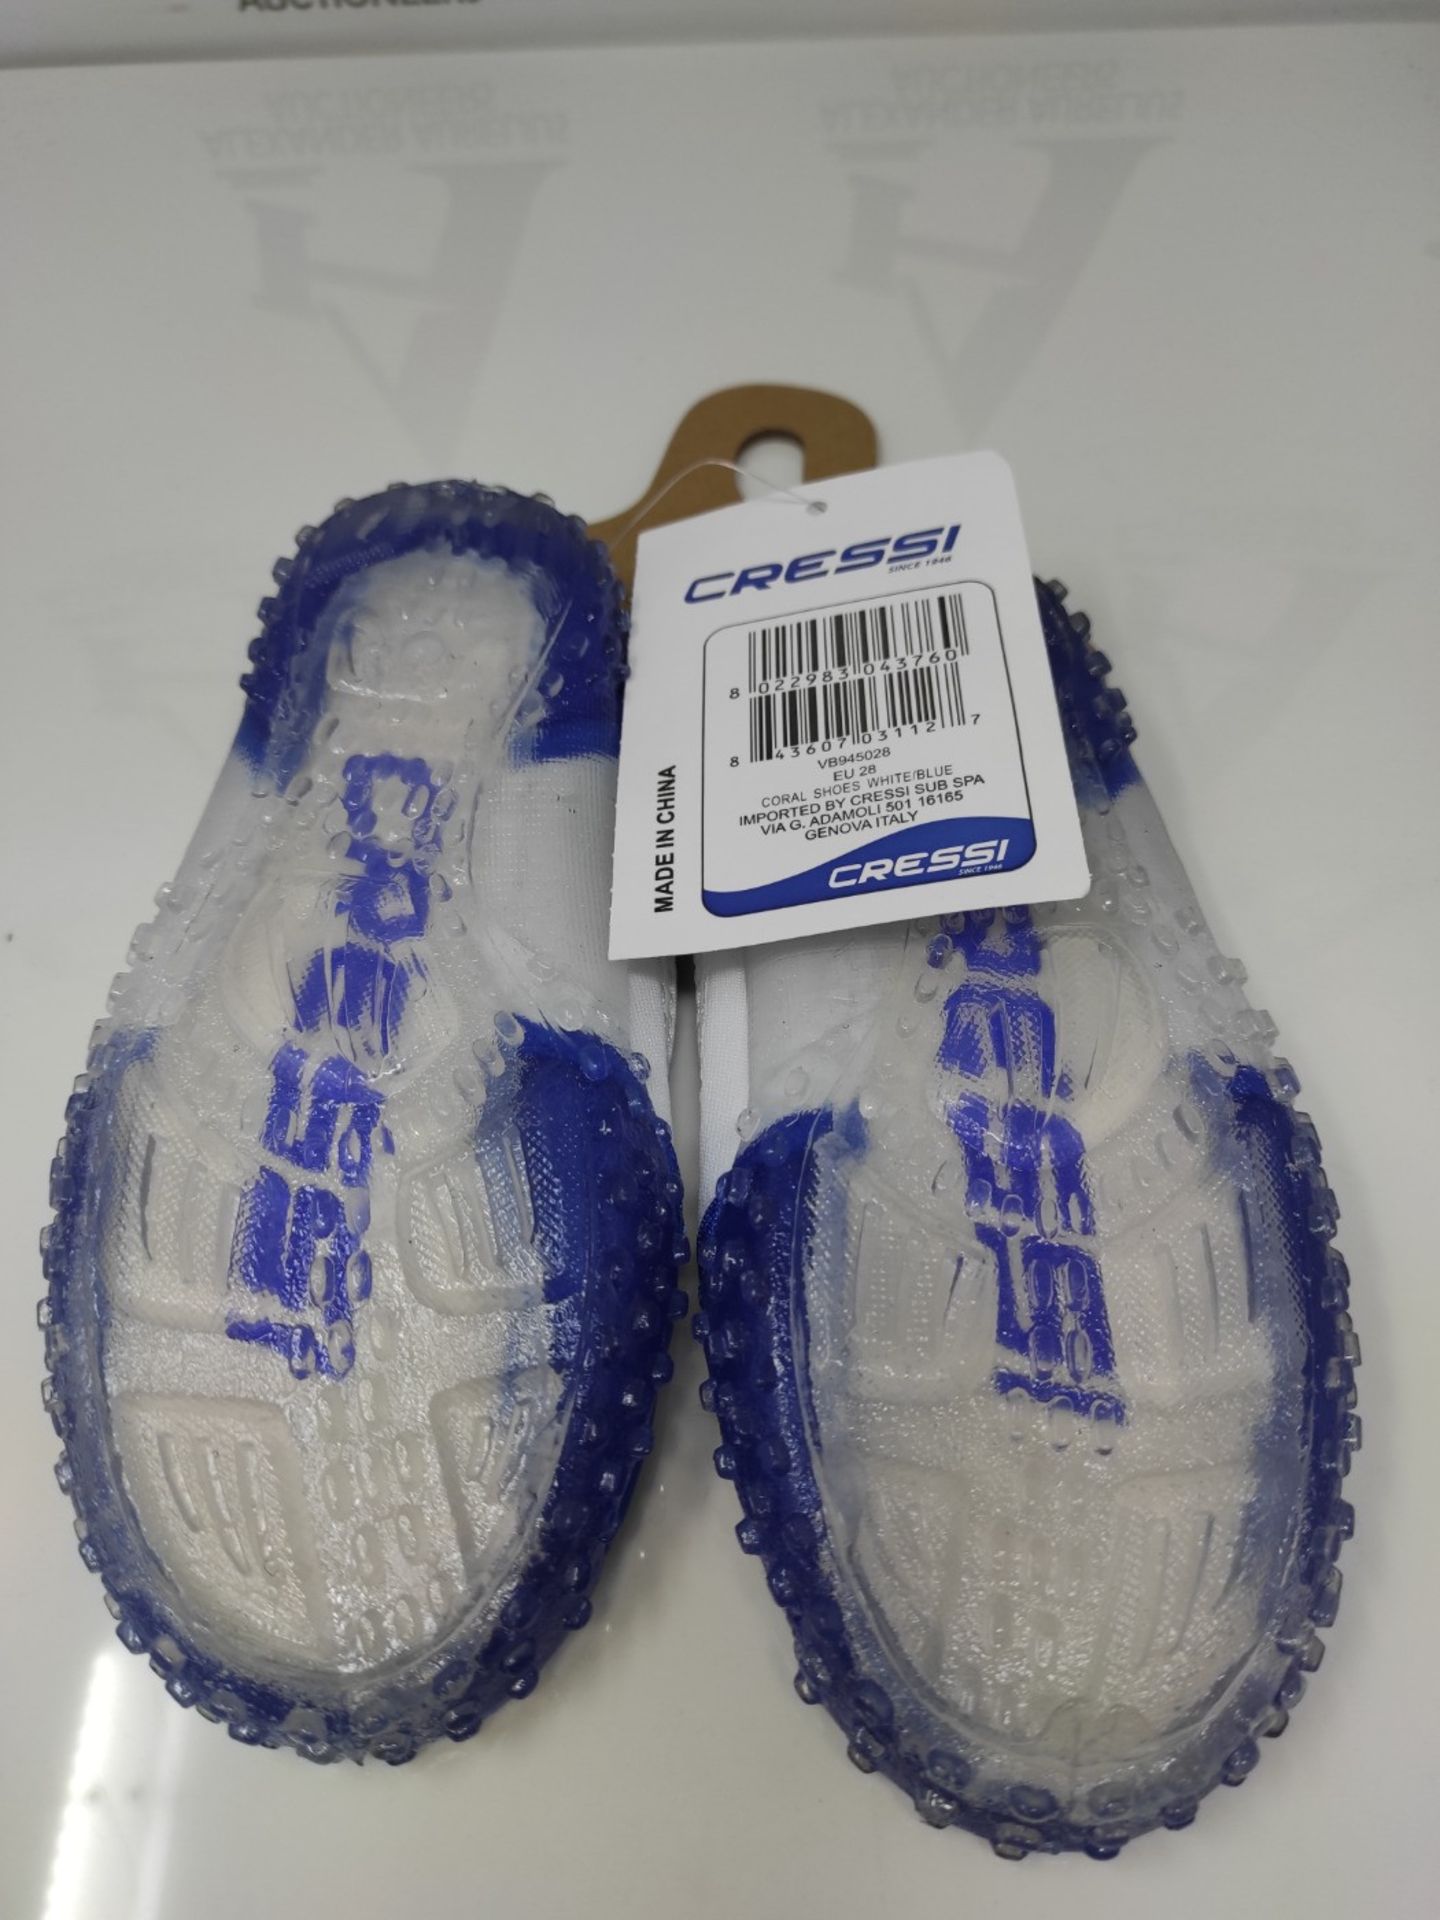 Cressi Coral water shoes suitable for sea, beach, boat and various water sports, for a - Image 3 of 3